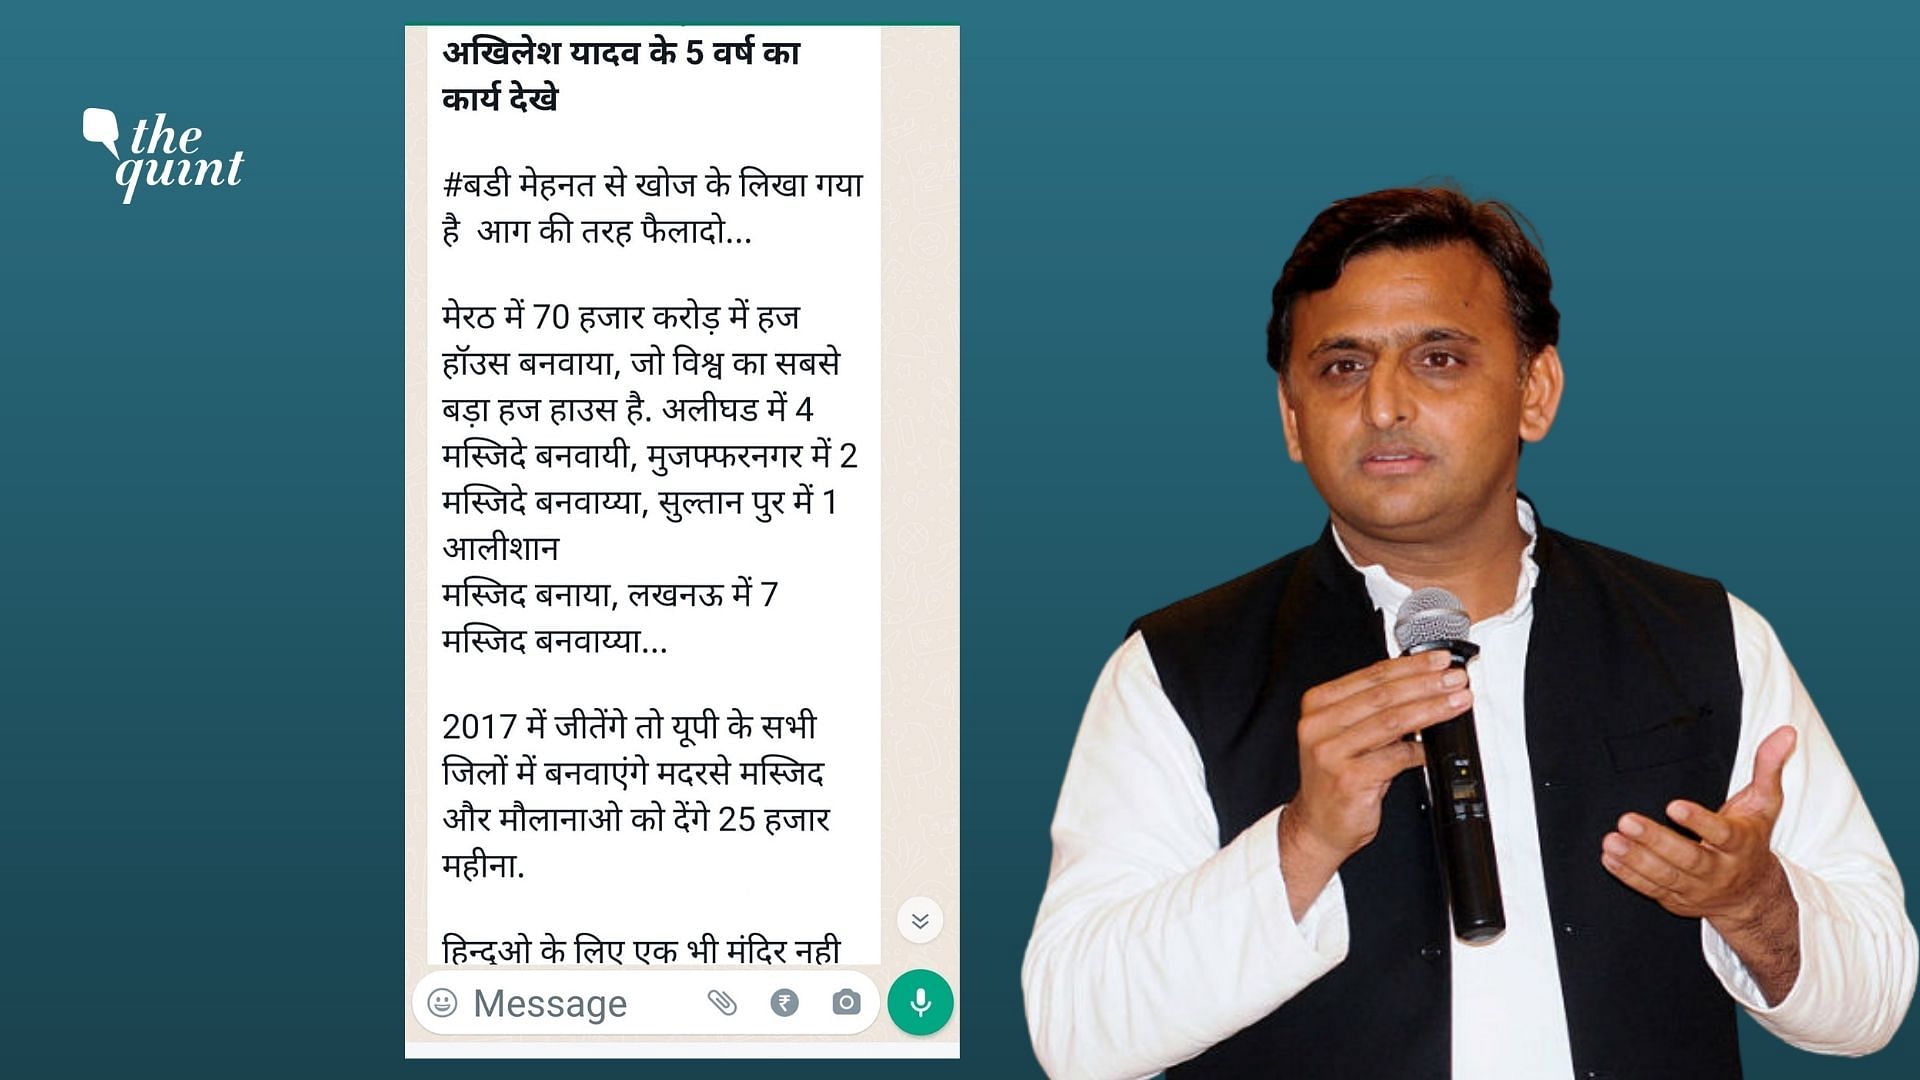 <div class="paragraphs"><p>The claim states that 500 temples were demolished when Akhilesh Yadav was the CM of the state.&nbsp;</p></div>